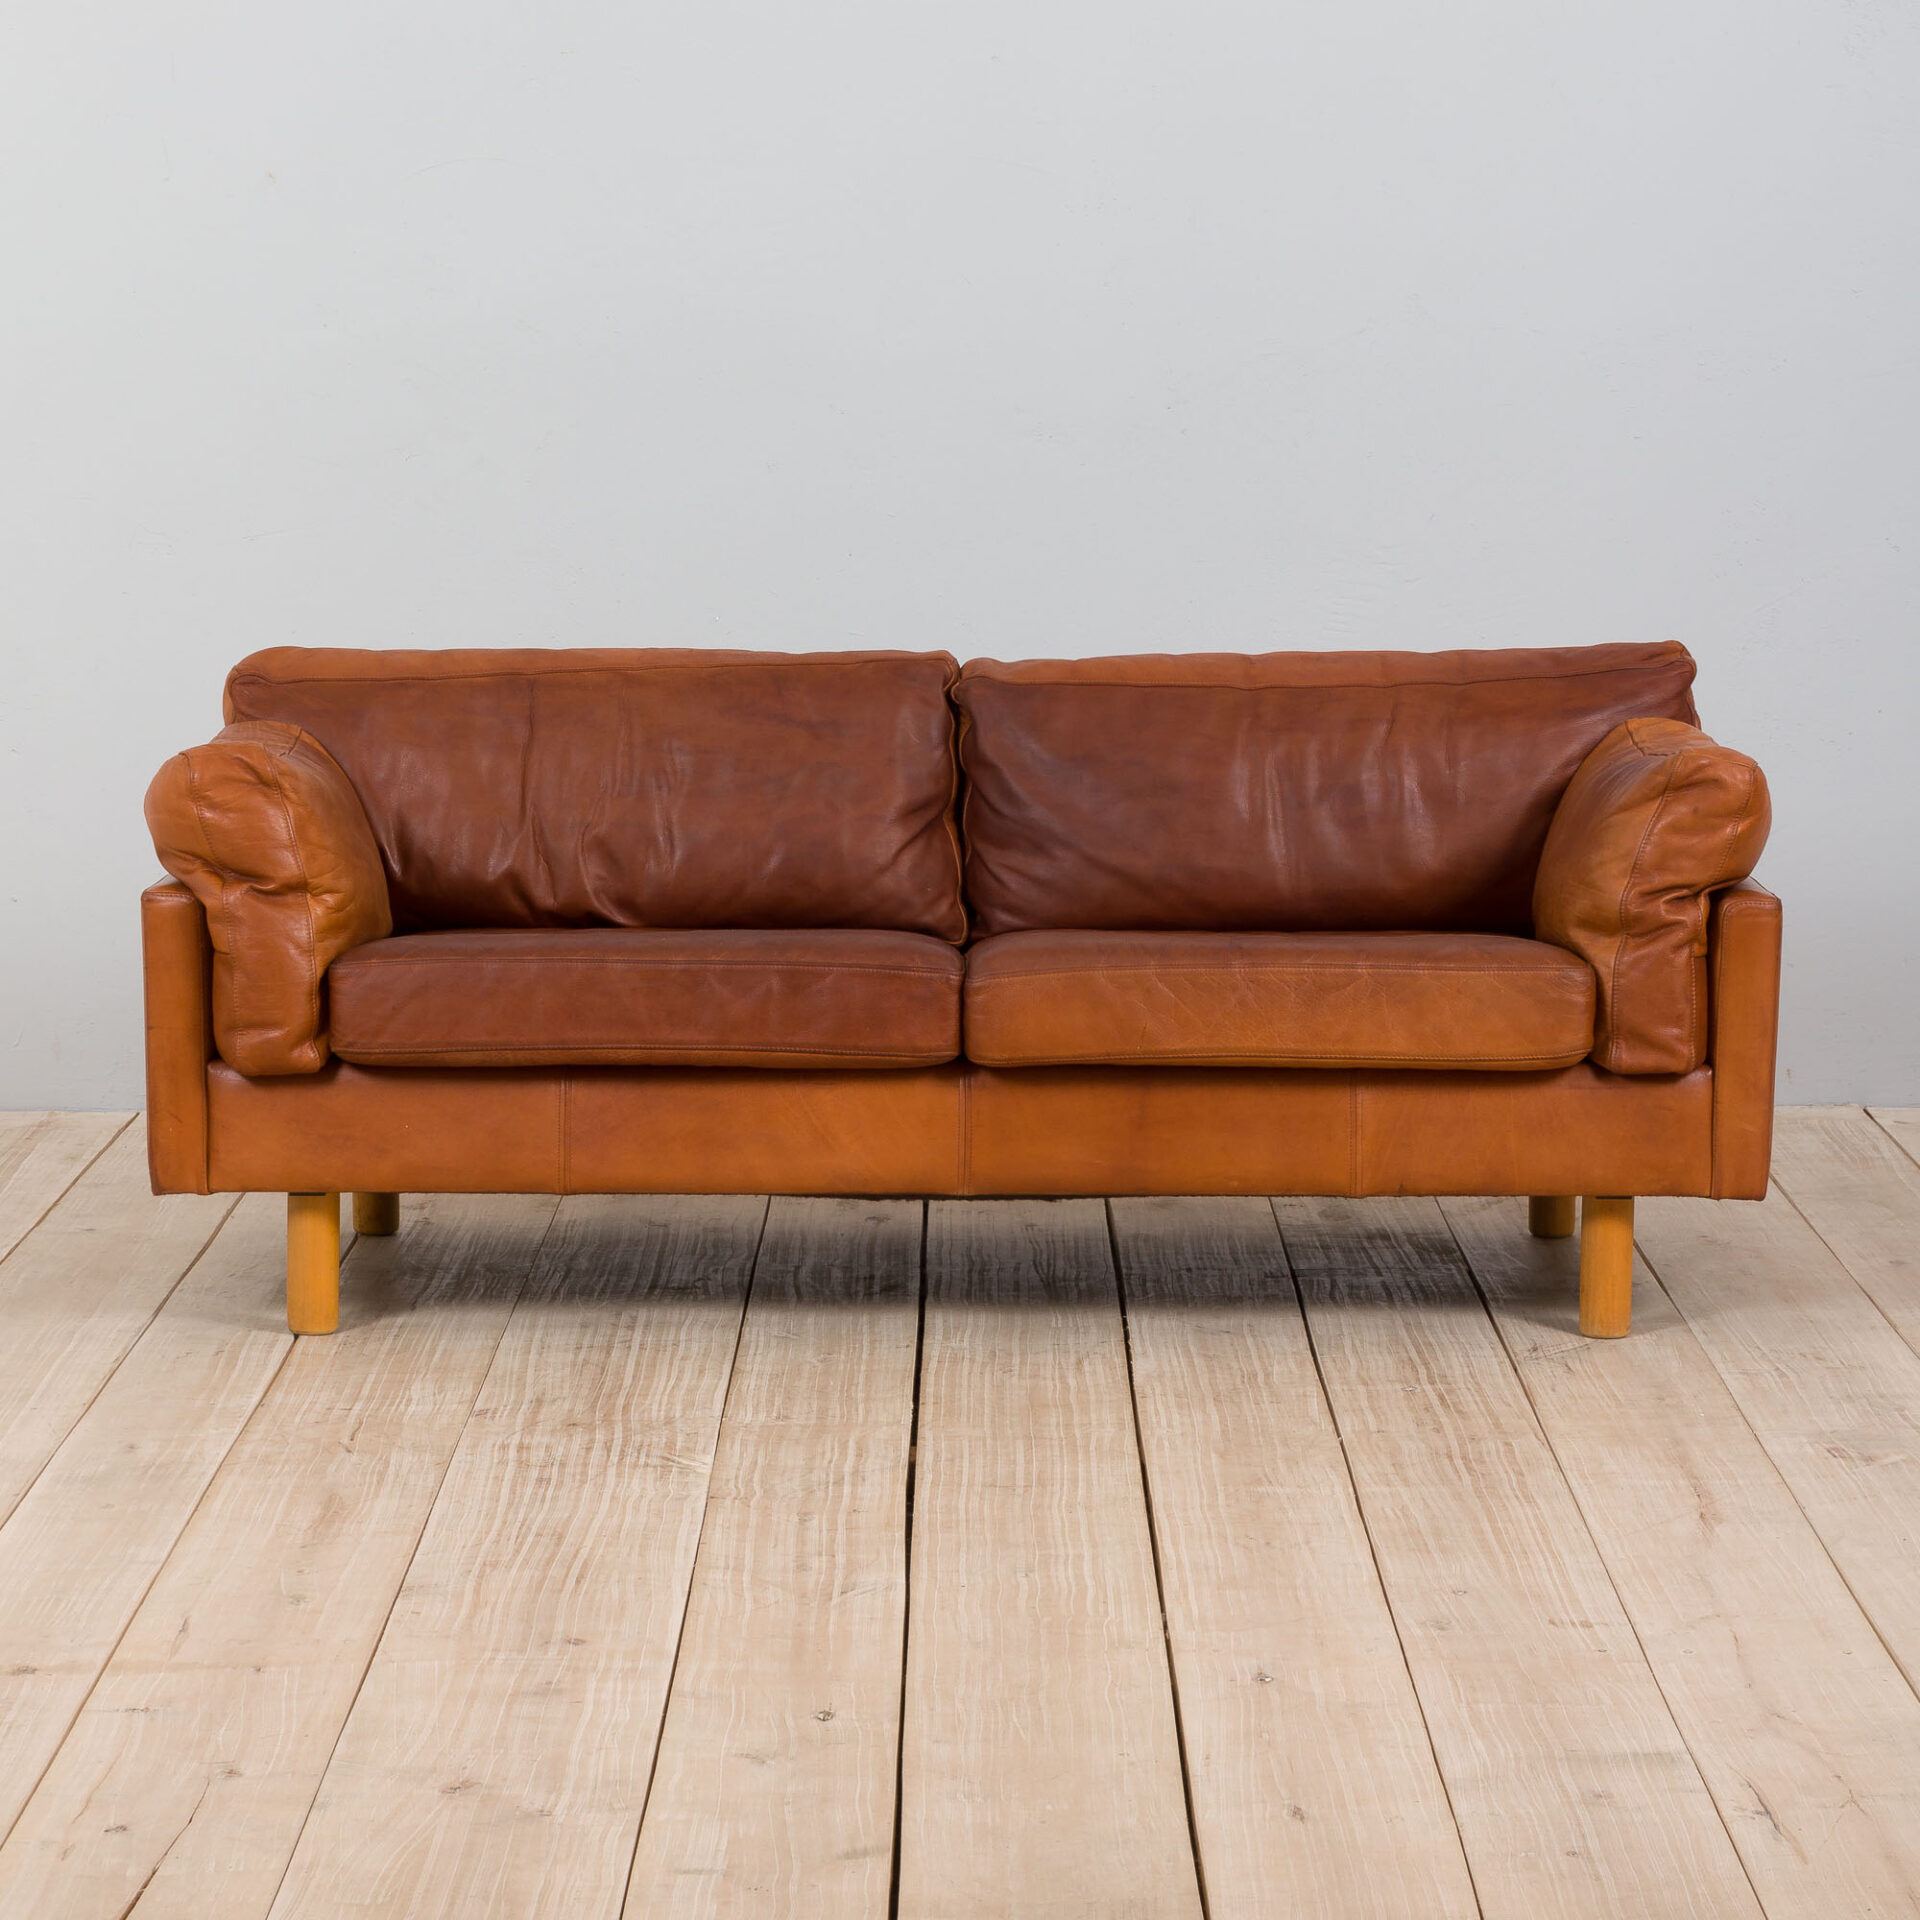 Danish two the half seater vintage cognac leather sofa in the style of Jørgen Gammelgaard, 1970s. - Futureantiques